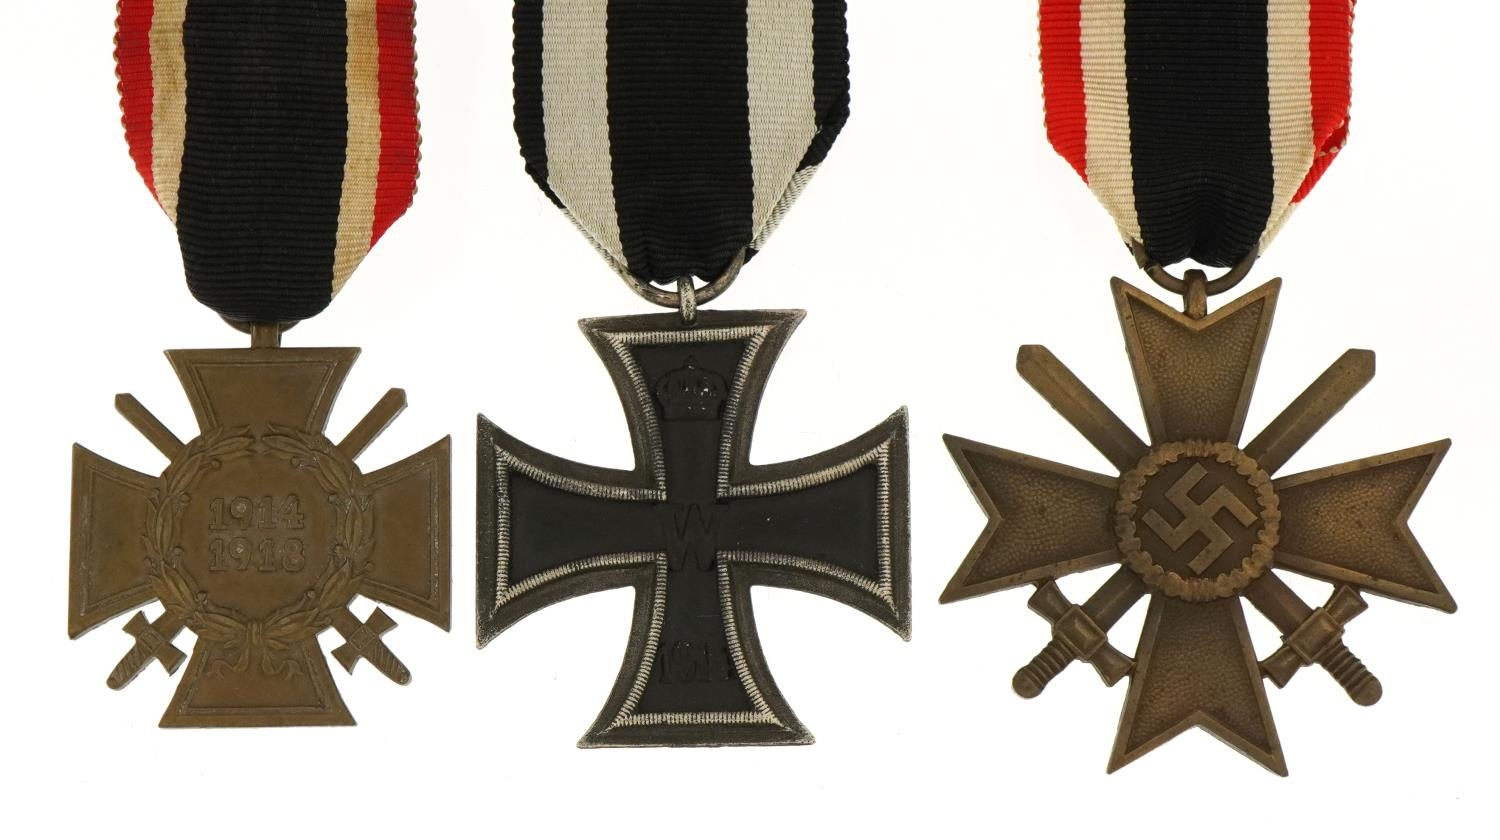 Three German military interest medals comprising Iron Cross, Knights Cross and Honour Cross